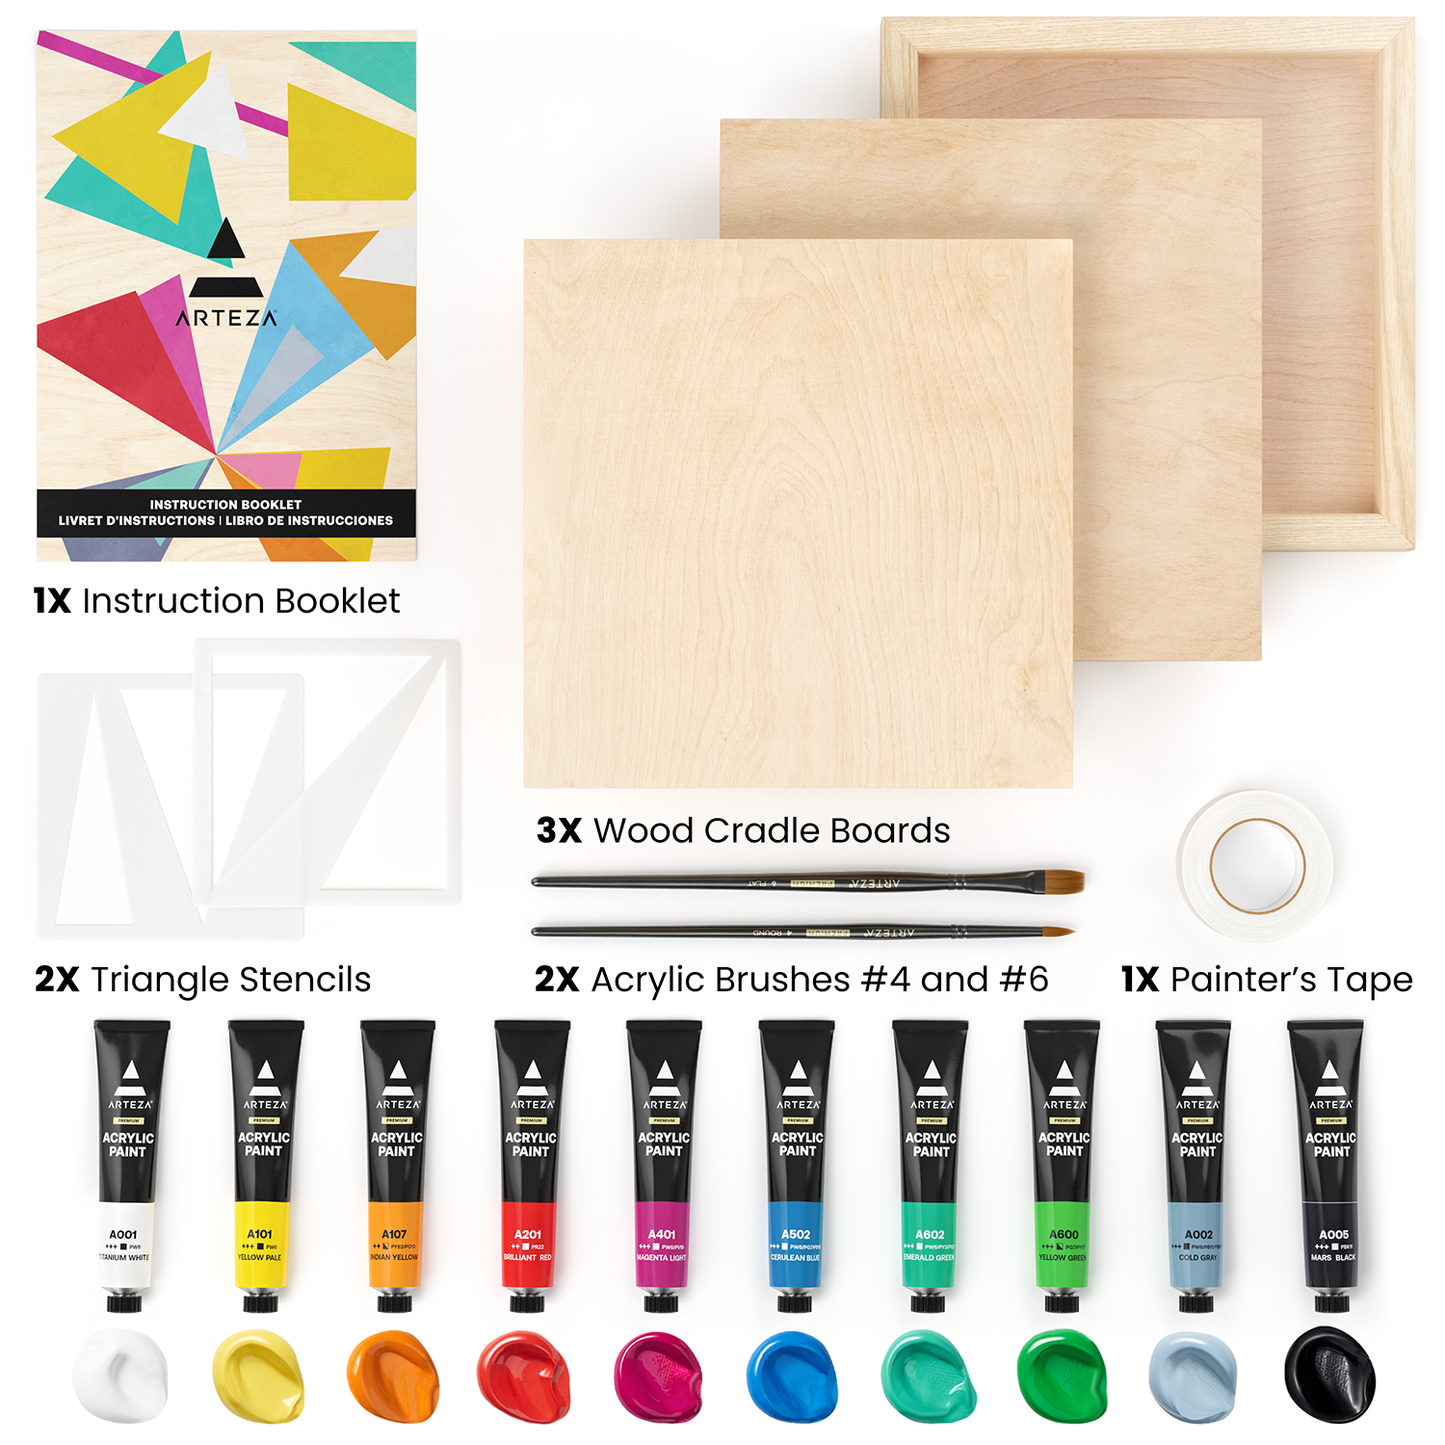 Abstract Wood Painting Set